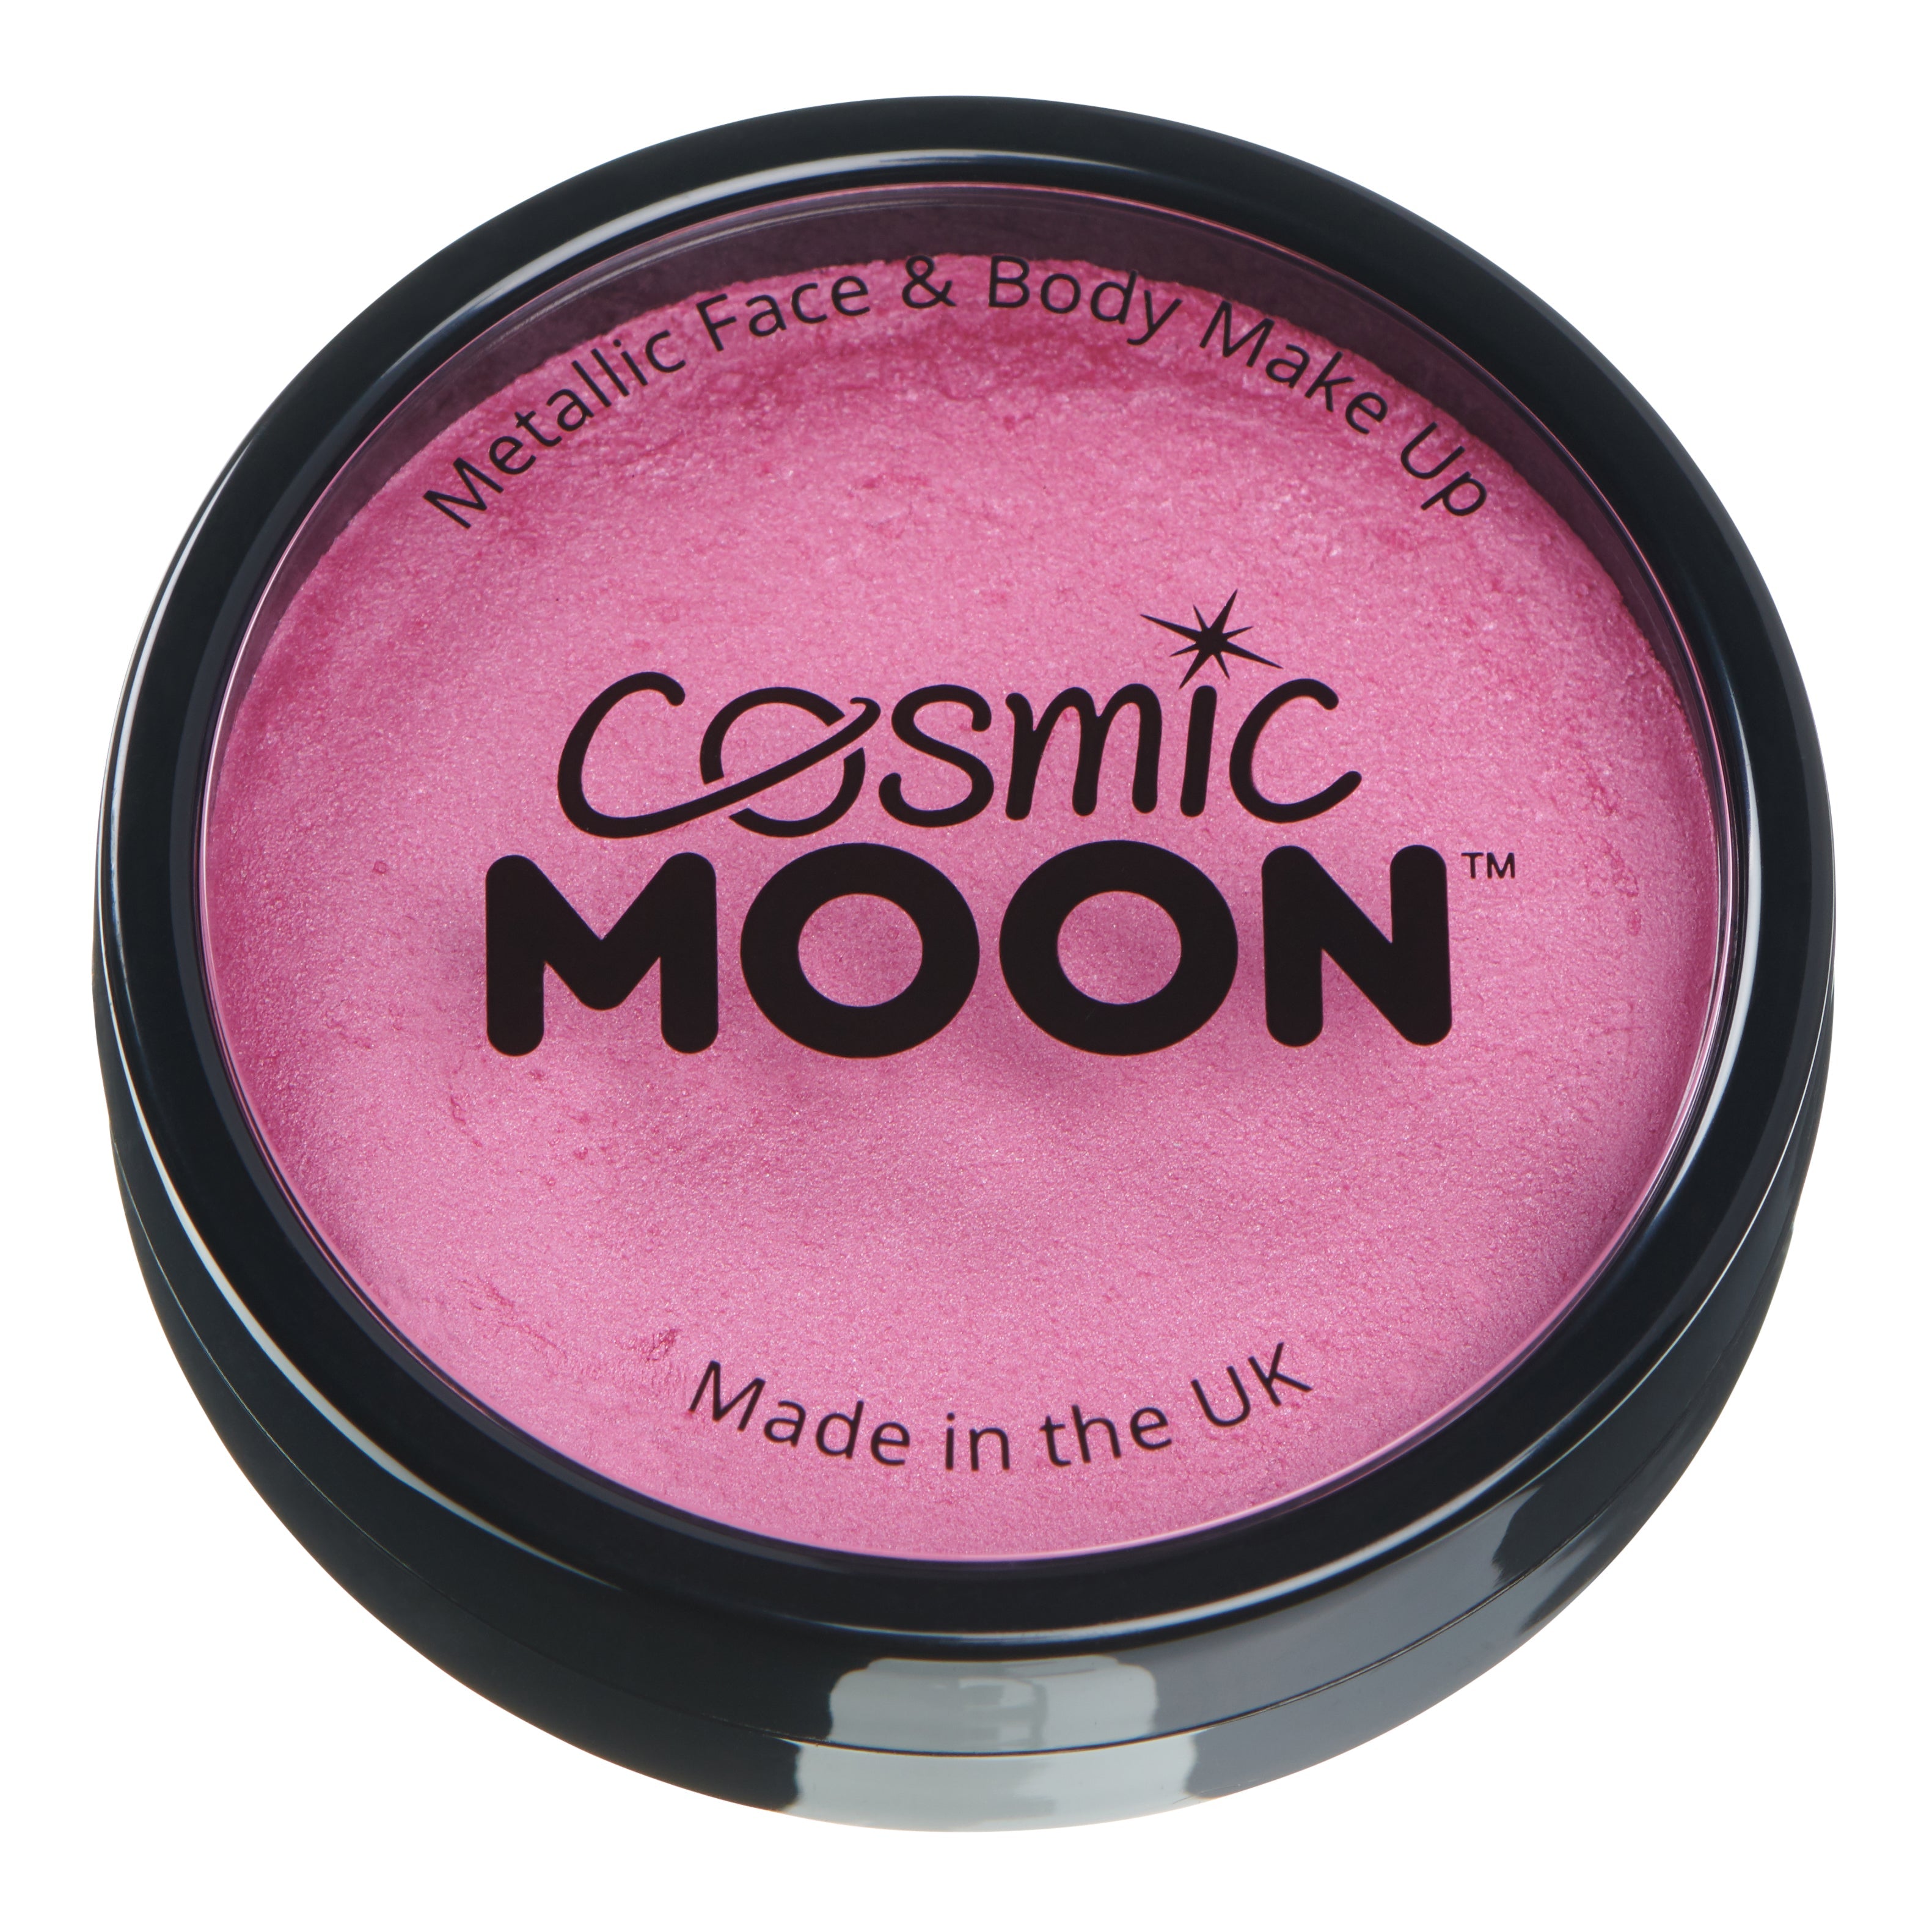 Pink - Metallic Professional Face Paint, 36g. Cosmetically certified, FDA & Health Canada compliant and cruelty free.